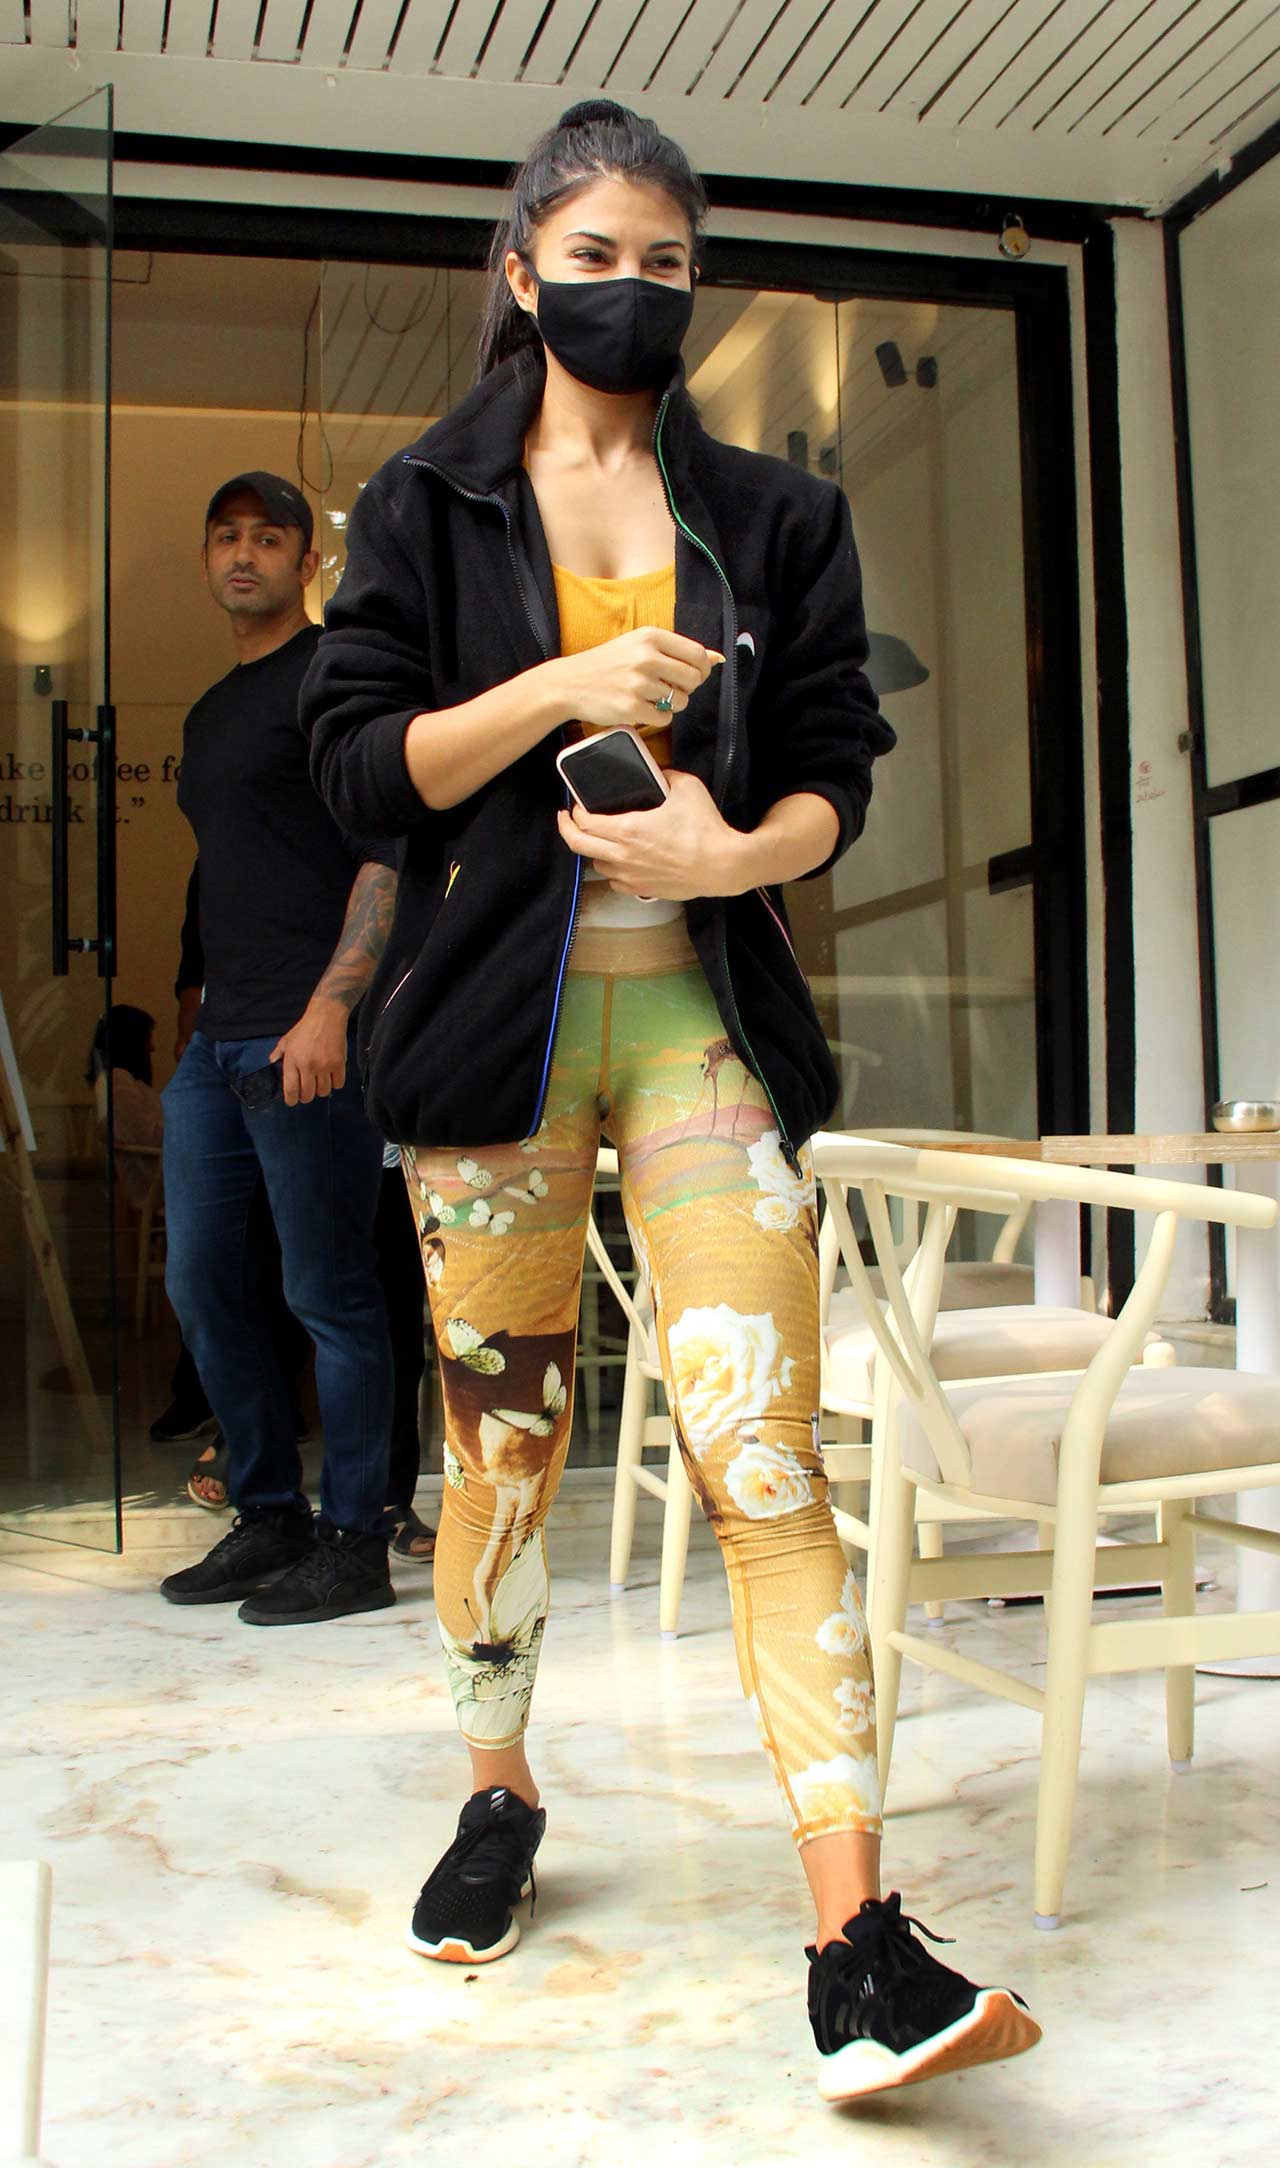 Jacqueline Fernandez was clicked by the paparazzi at a popular salon in Bandra, Mumbai. The actress, on the work front, will be next seen in Cirkus, Bhoot Police, Attack, Bachchan Pandey.